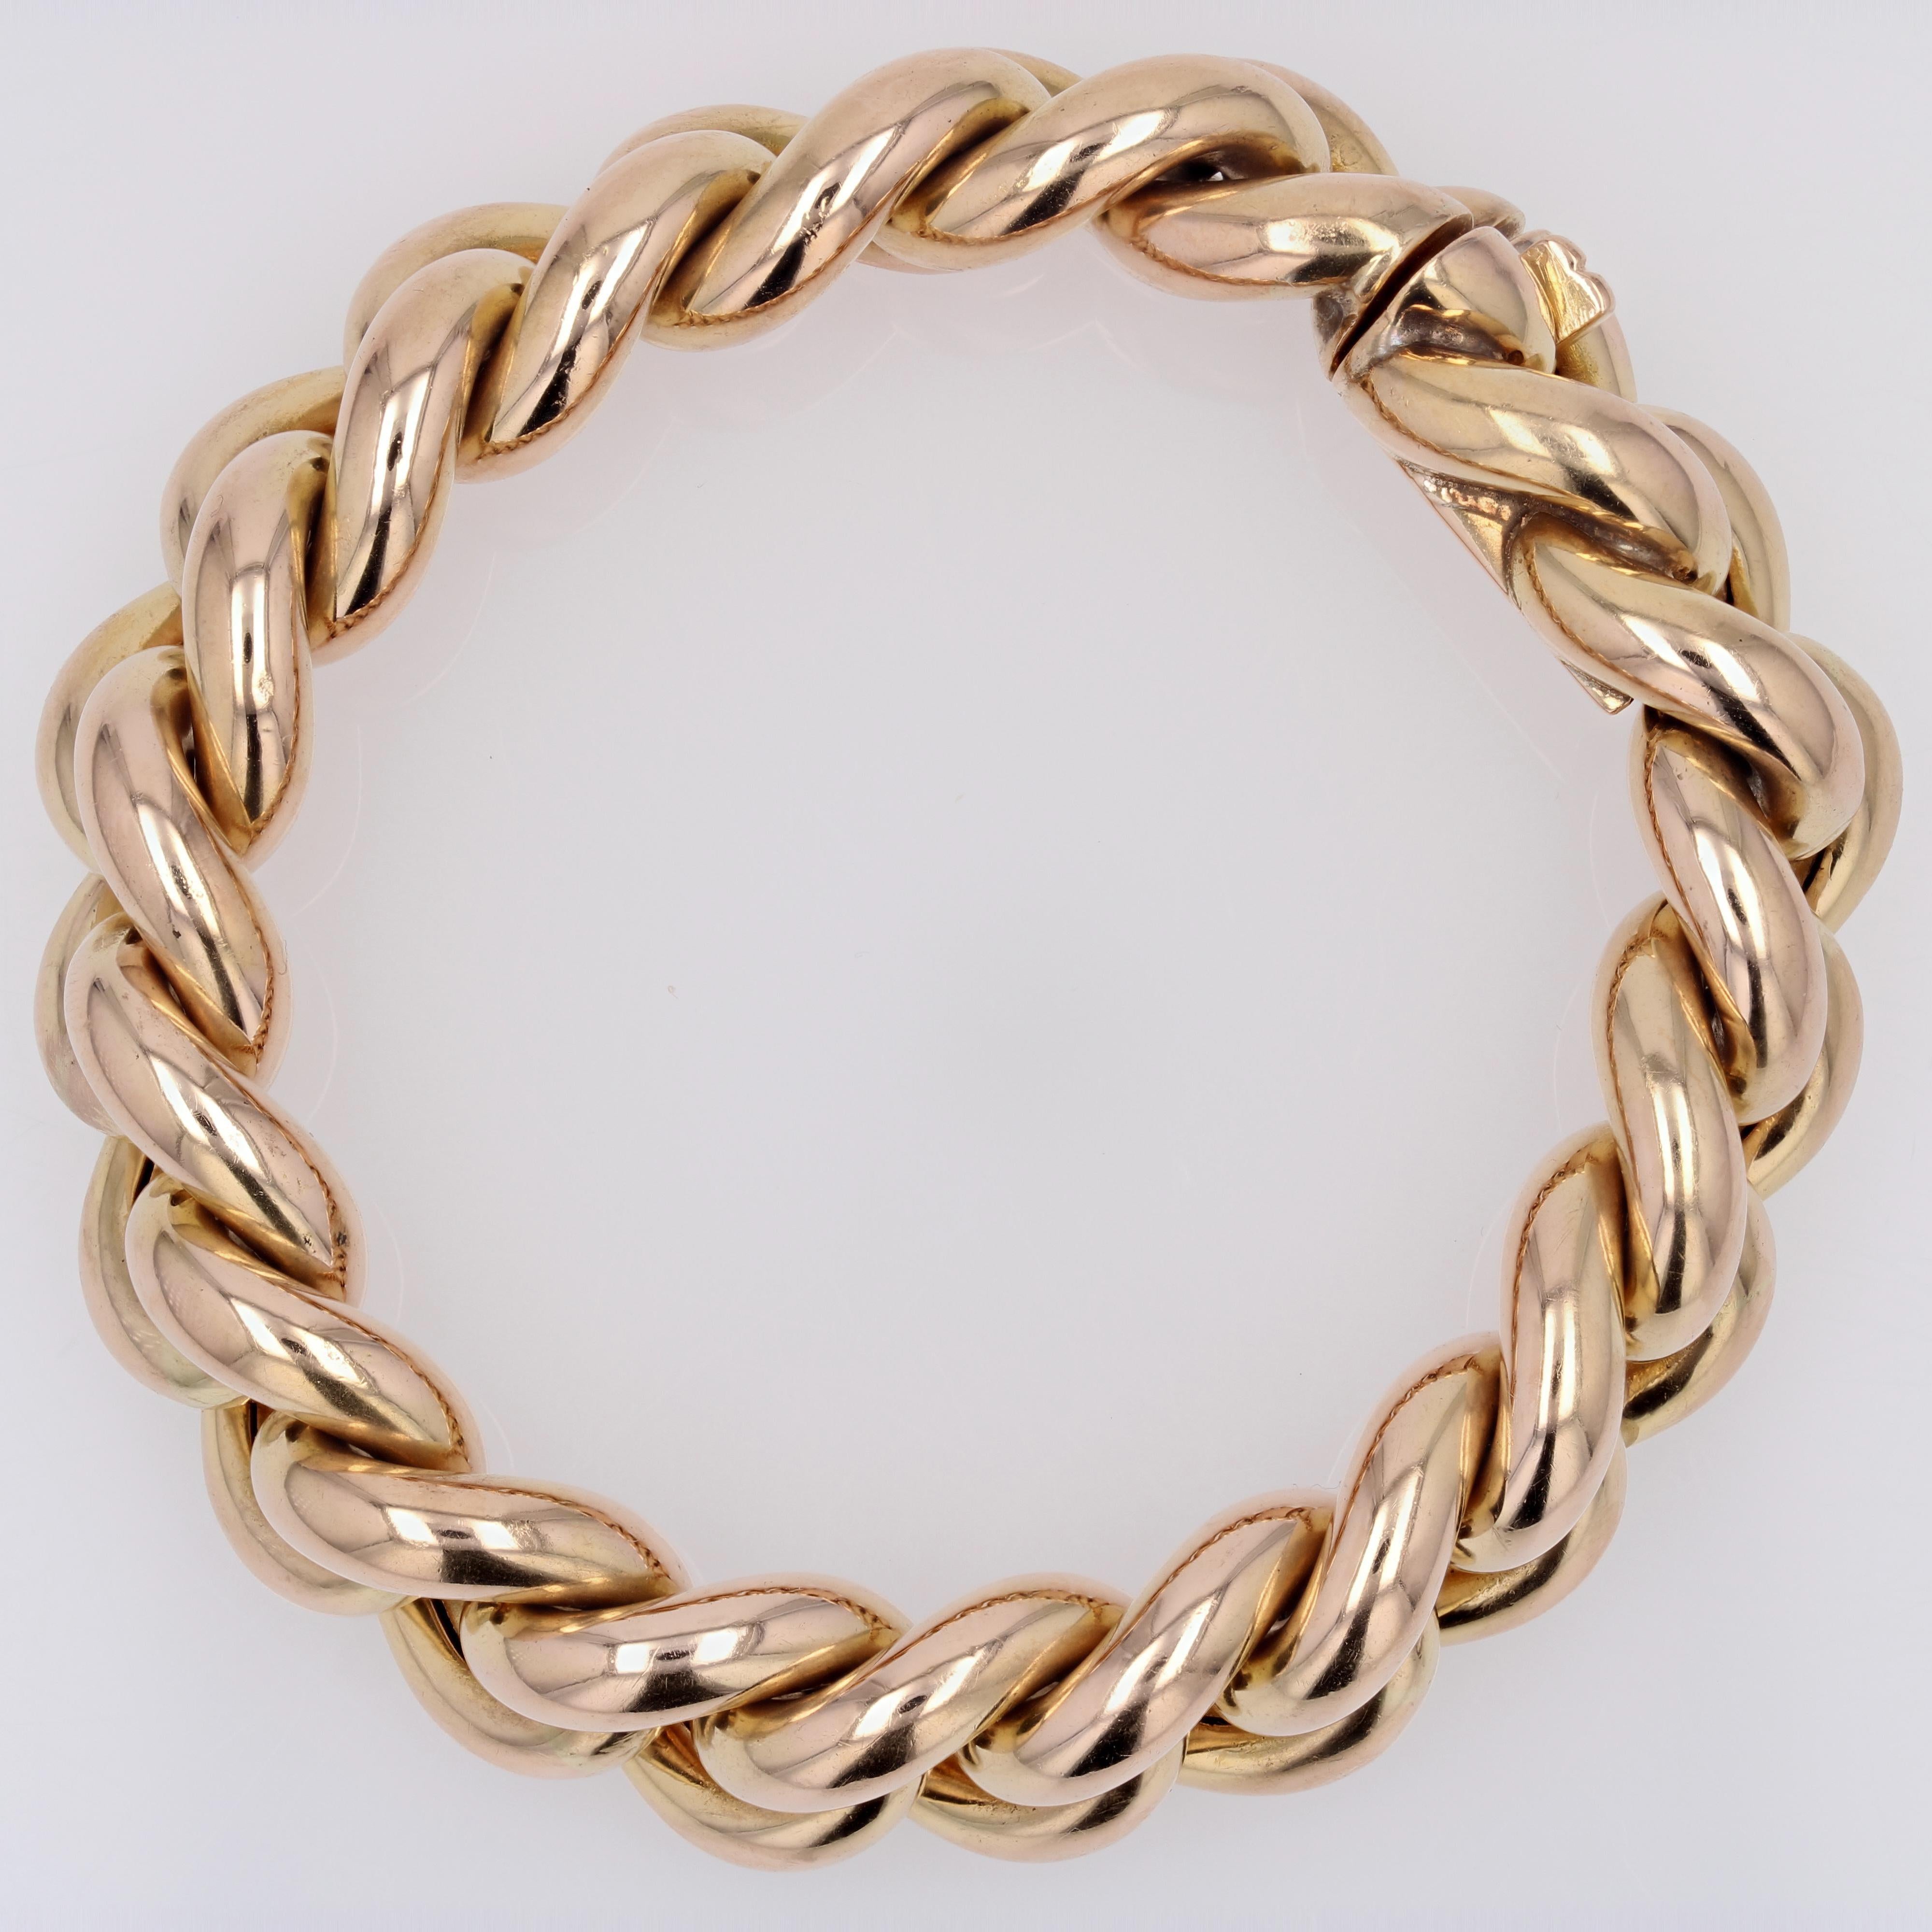 French 1950s 18 Karat Rose Gold Curb Chain Retro Bracelet For Sale 3